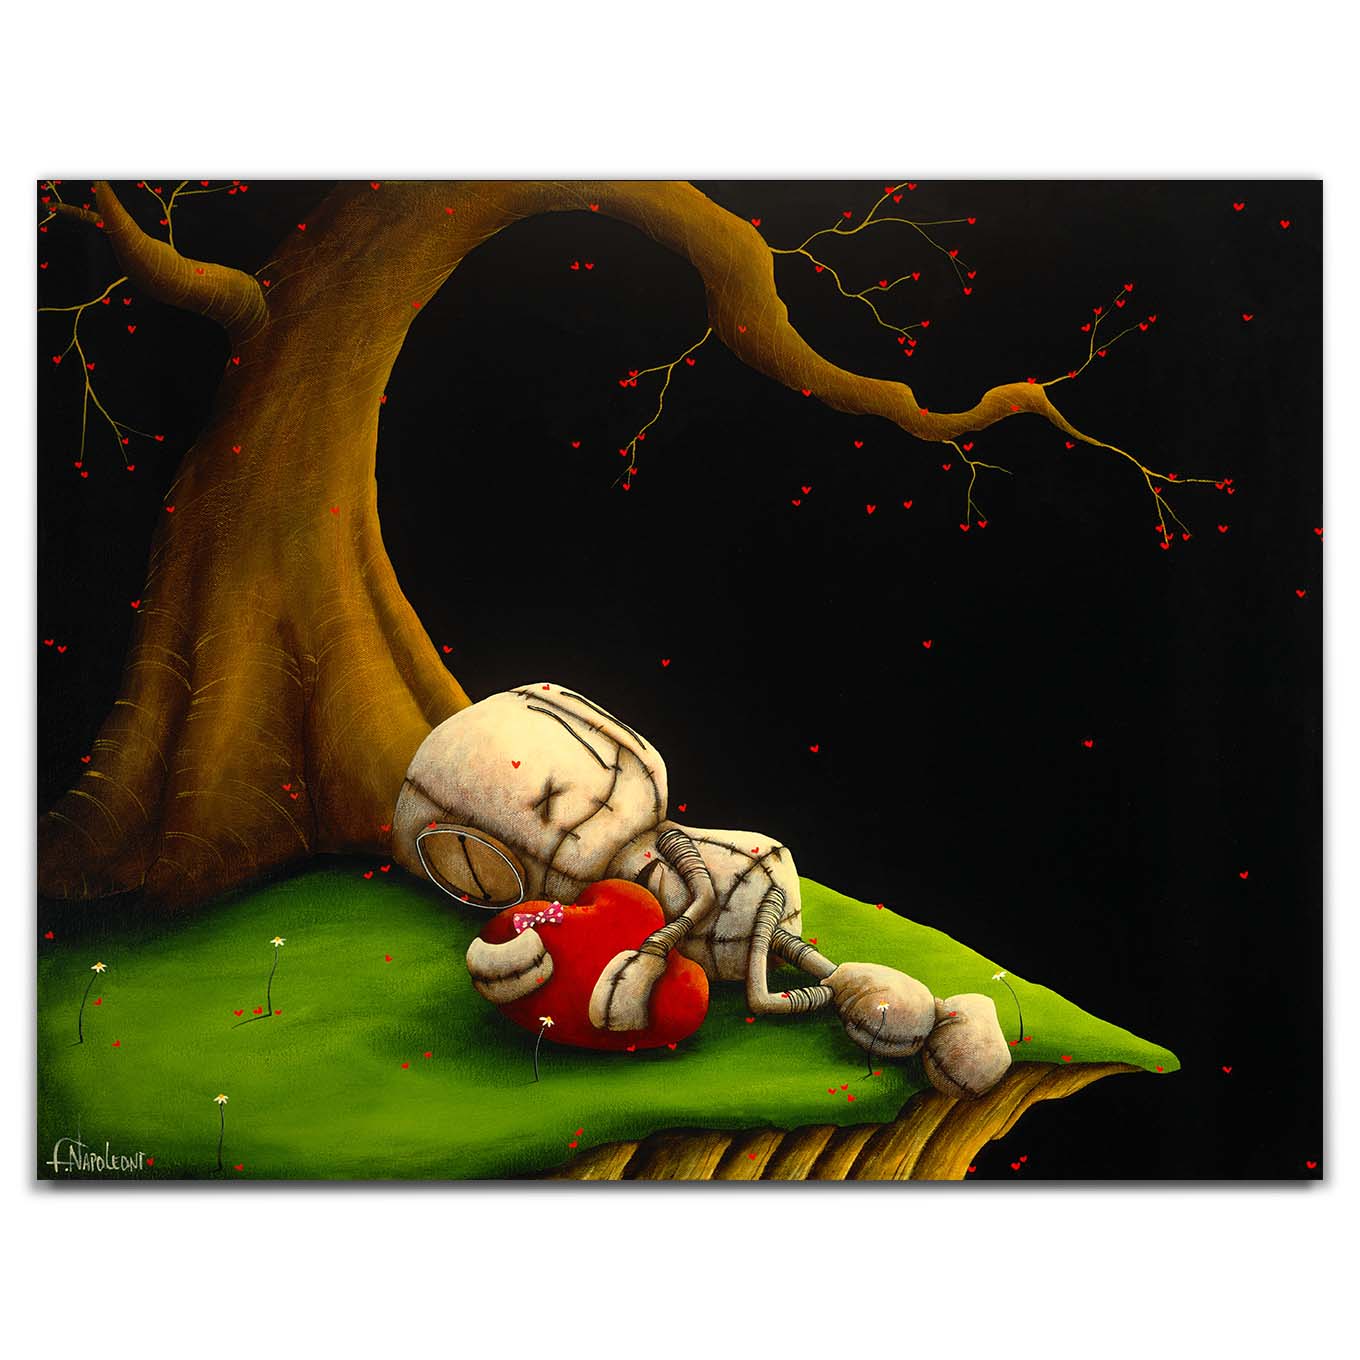 Fabio Napoleoni "This is Nice" Limited Edition Canvas Giclee